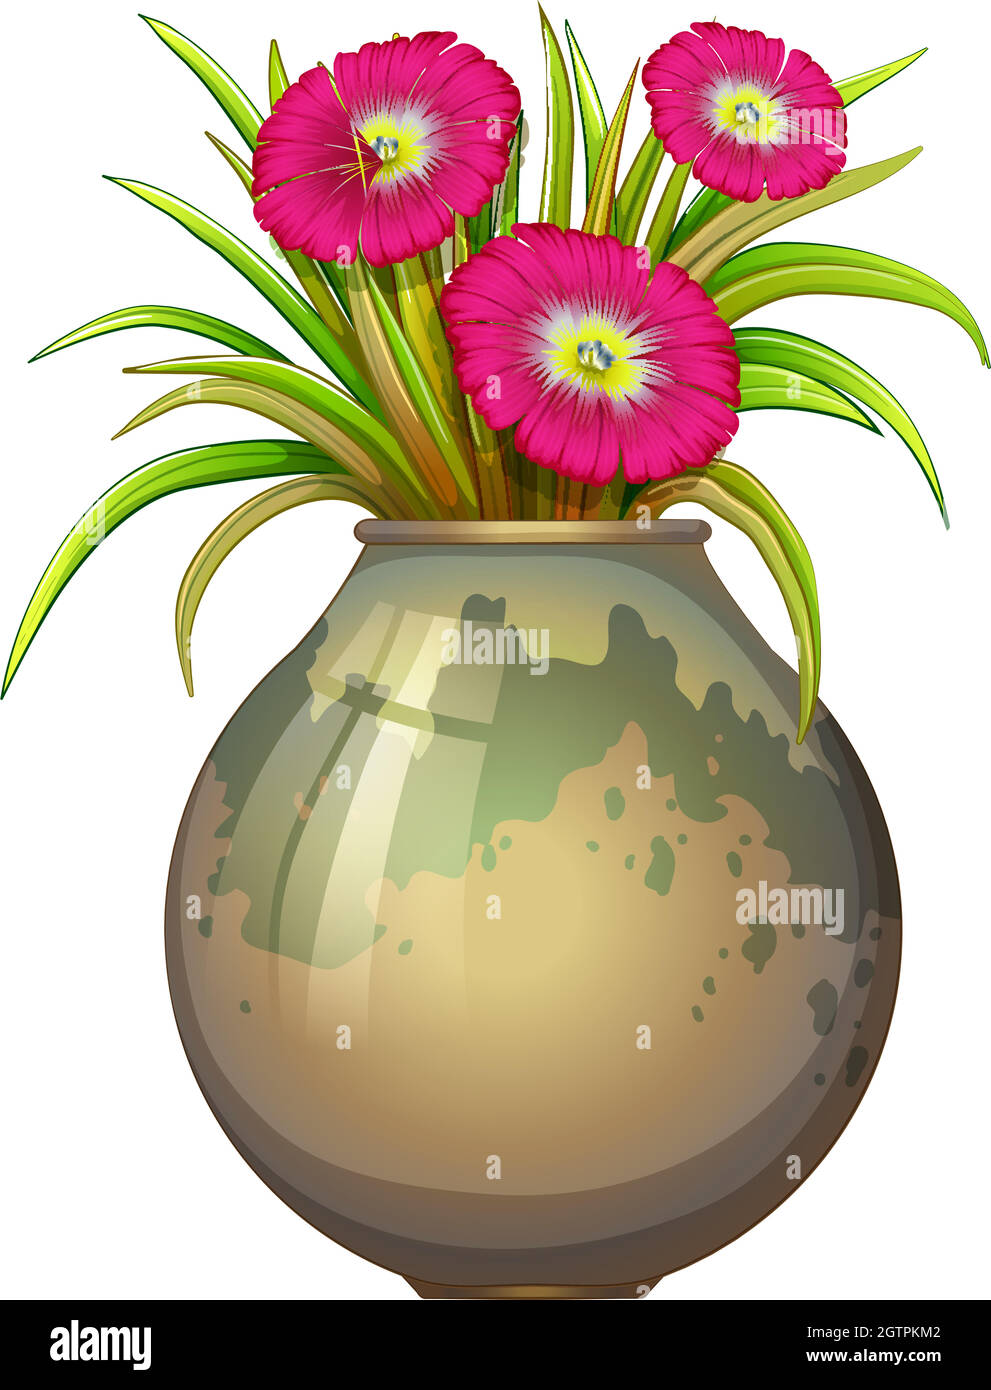 A big pot with flowers Stock Vector